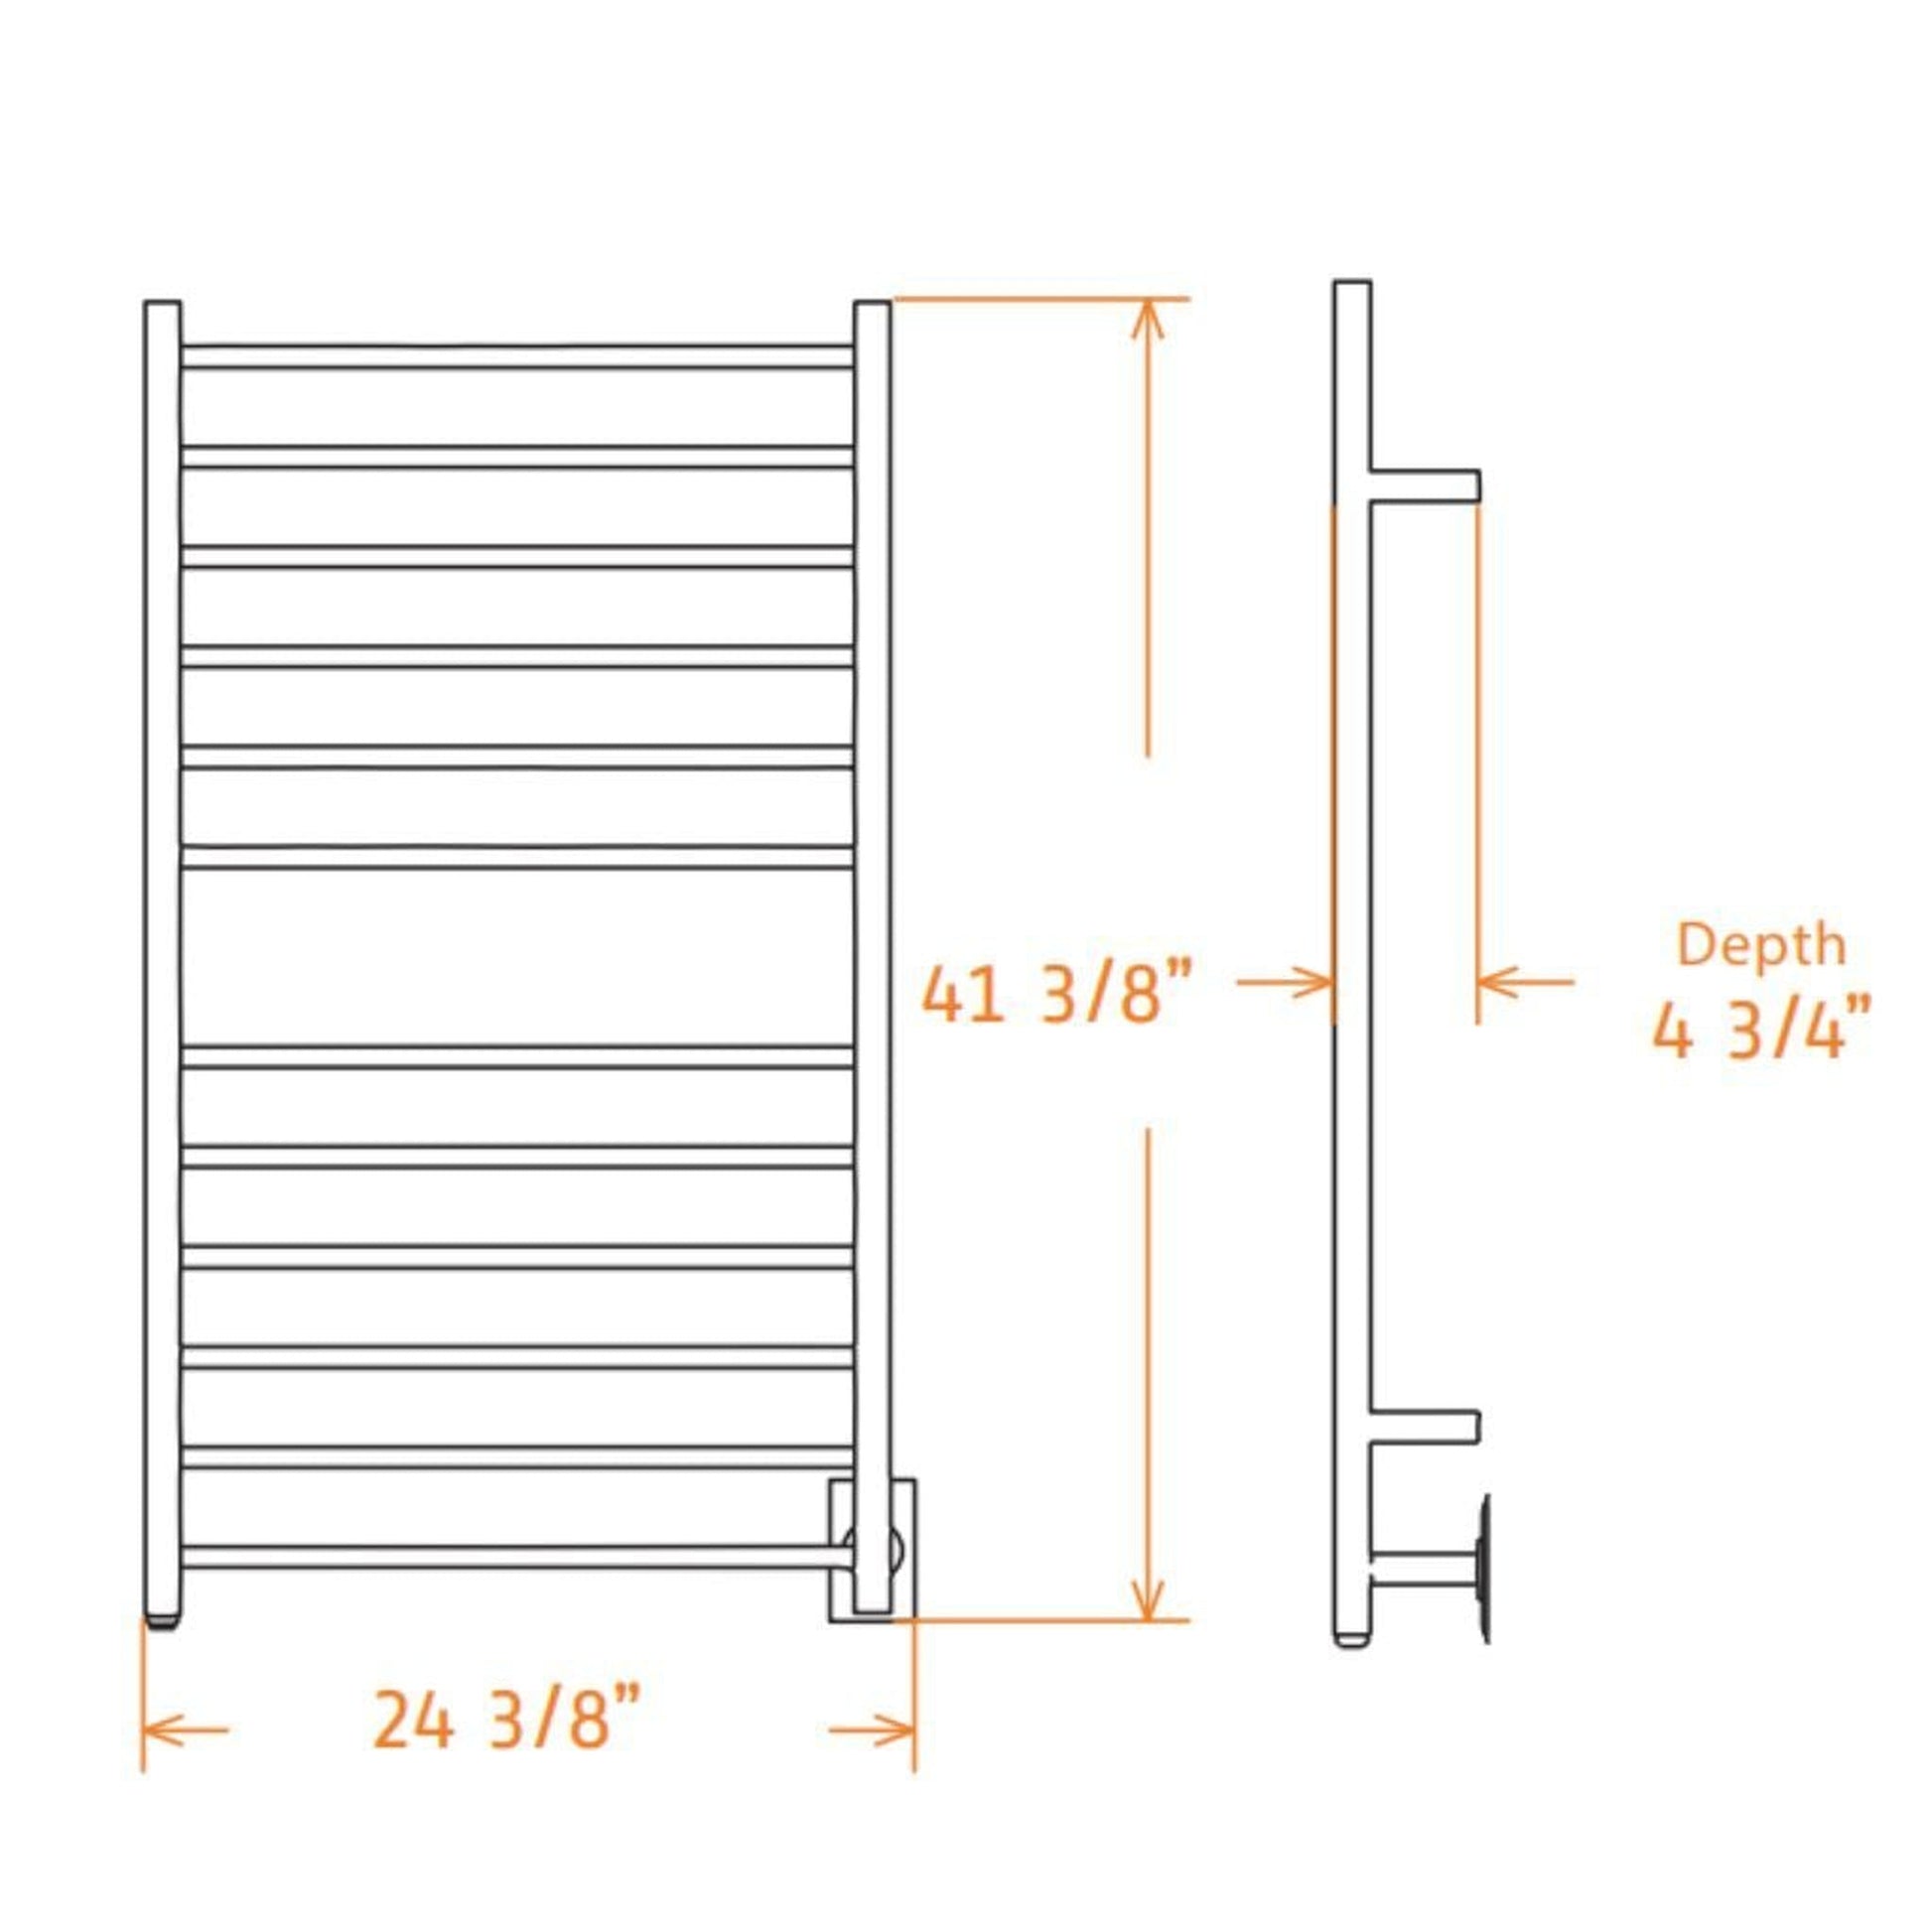 Amba Radiant Large Straight 12-Bar Polished Stainless Steel Hardwired Towel Warmer